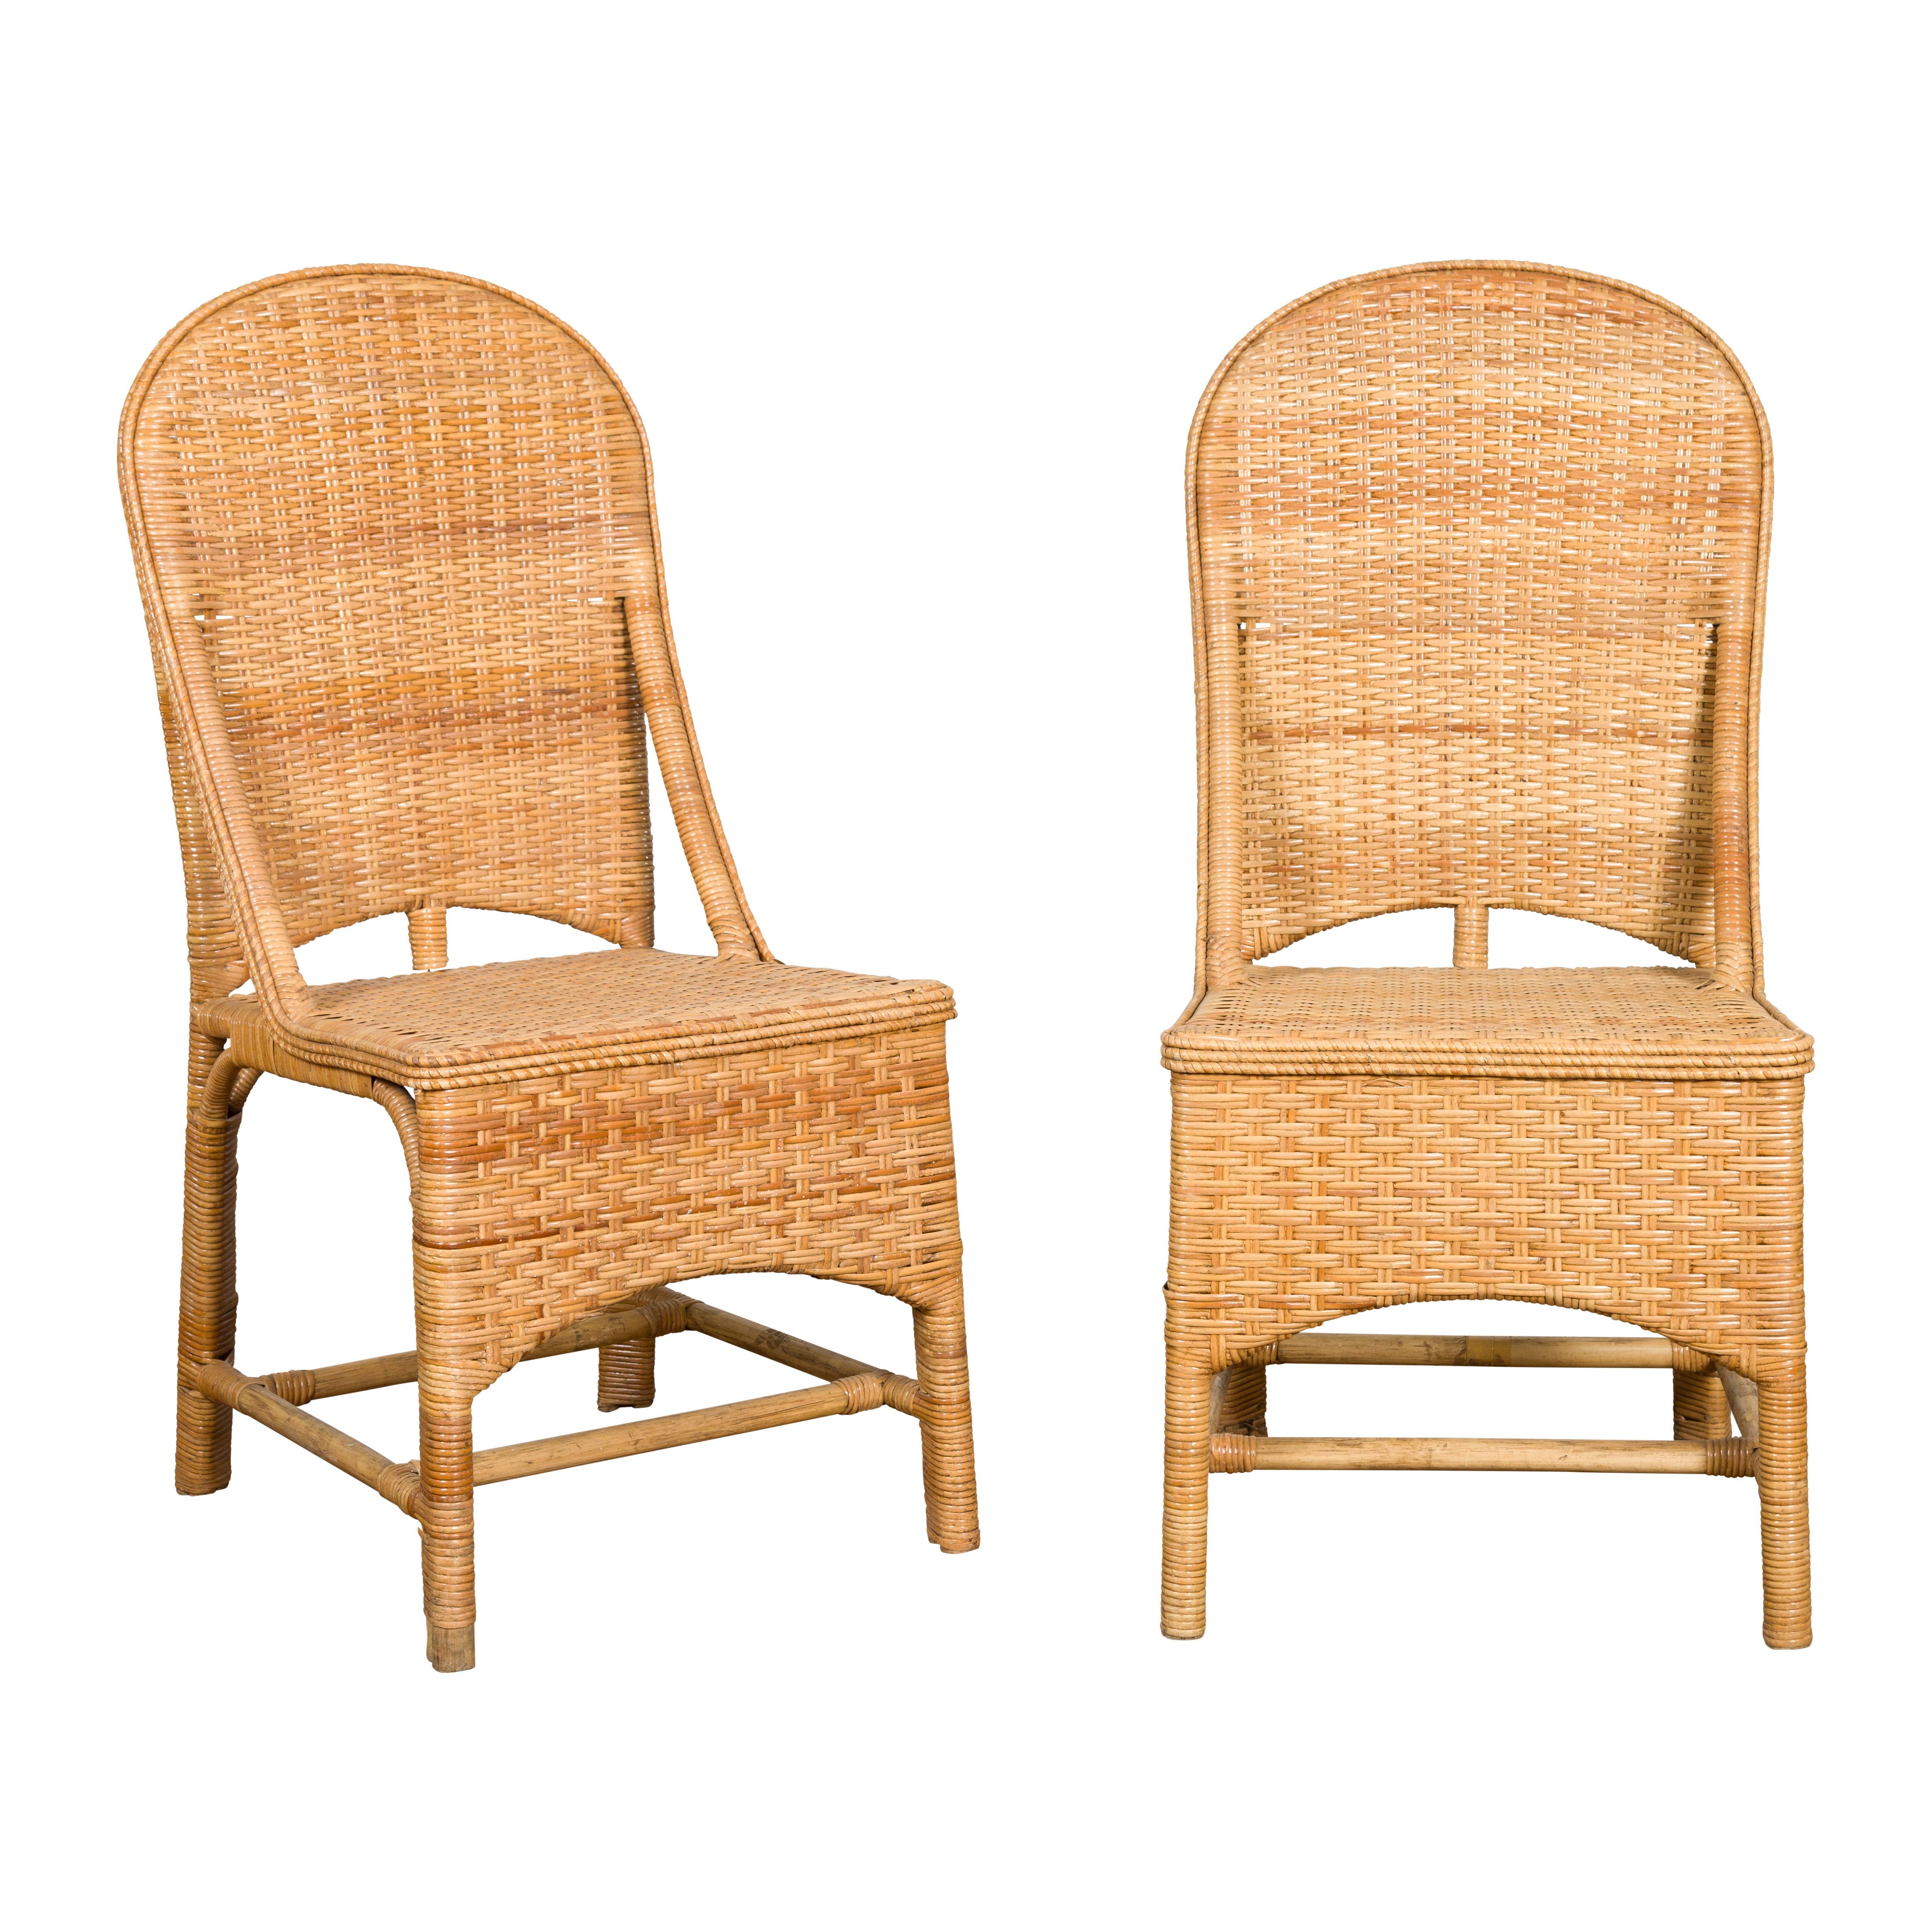 1950s Midcentury Country Style Woven Rattan Rustic Chairs, Pair For Sale